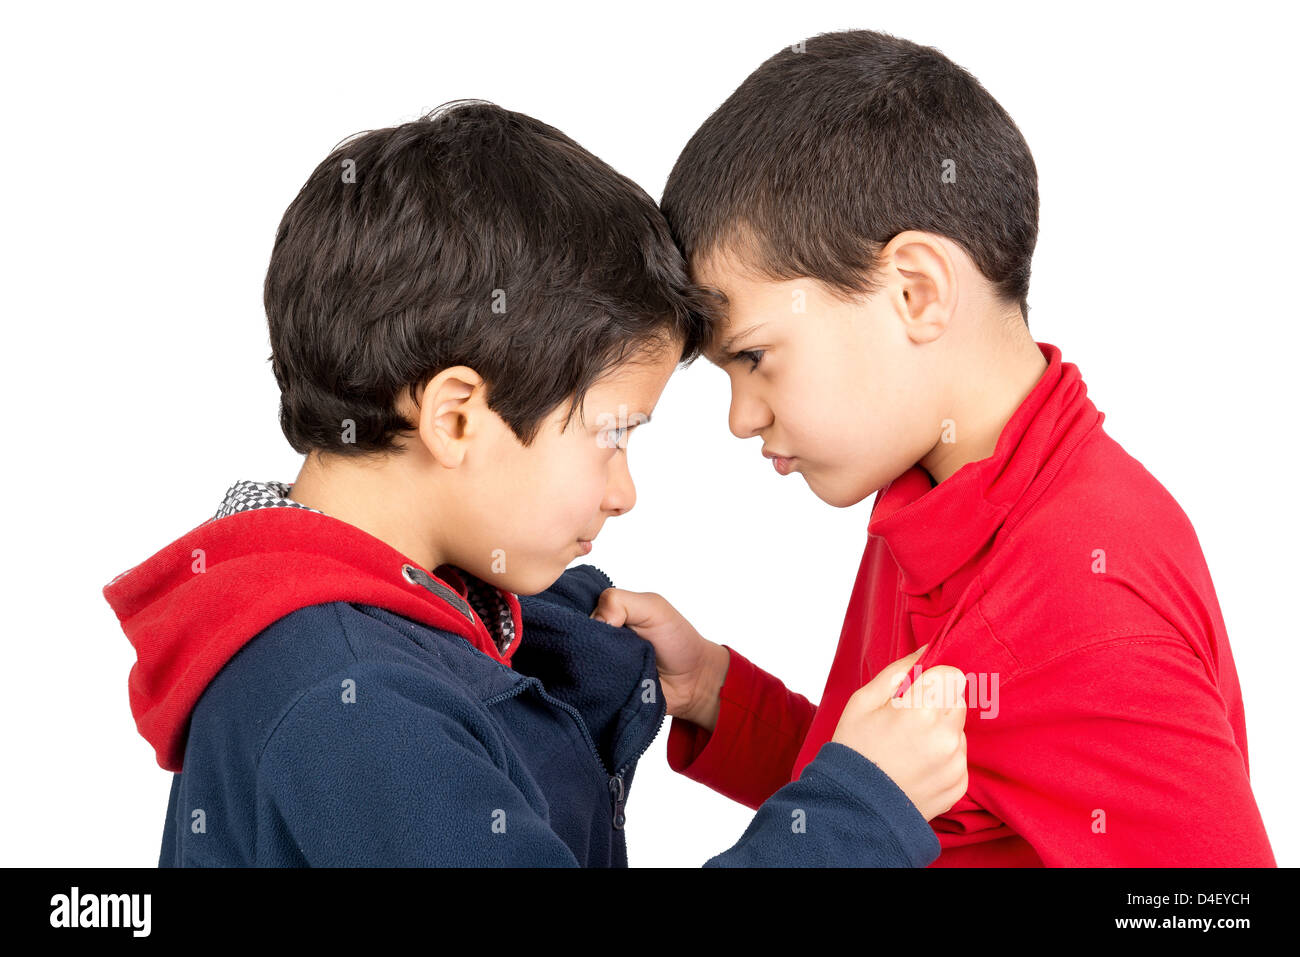 Two boys fighting isolated in white Stock Photo